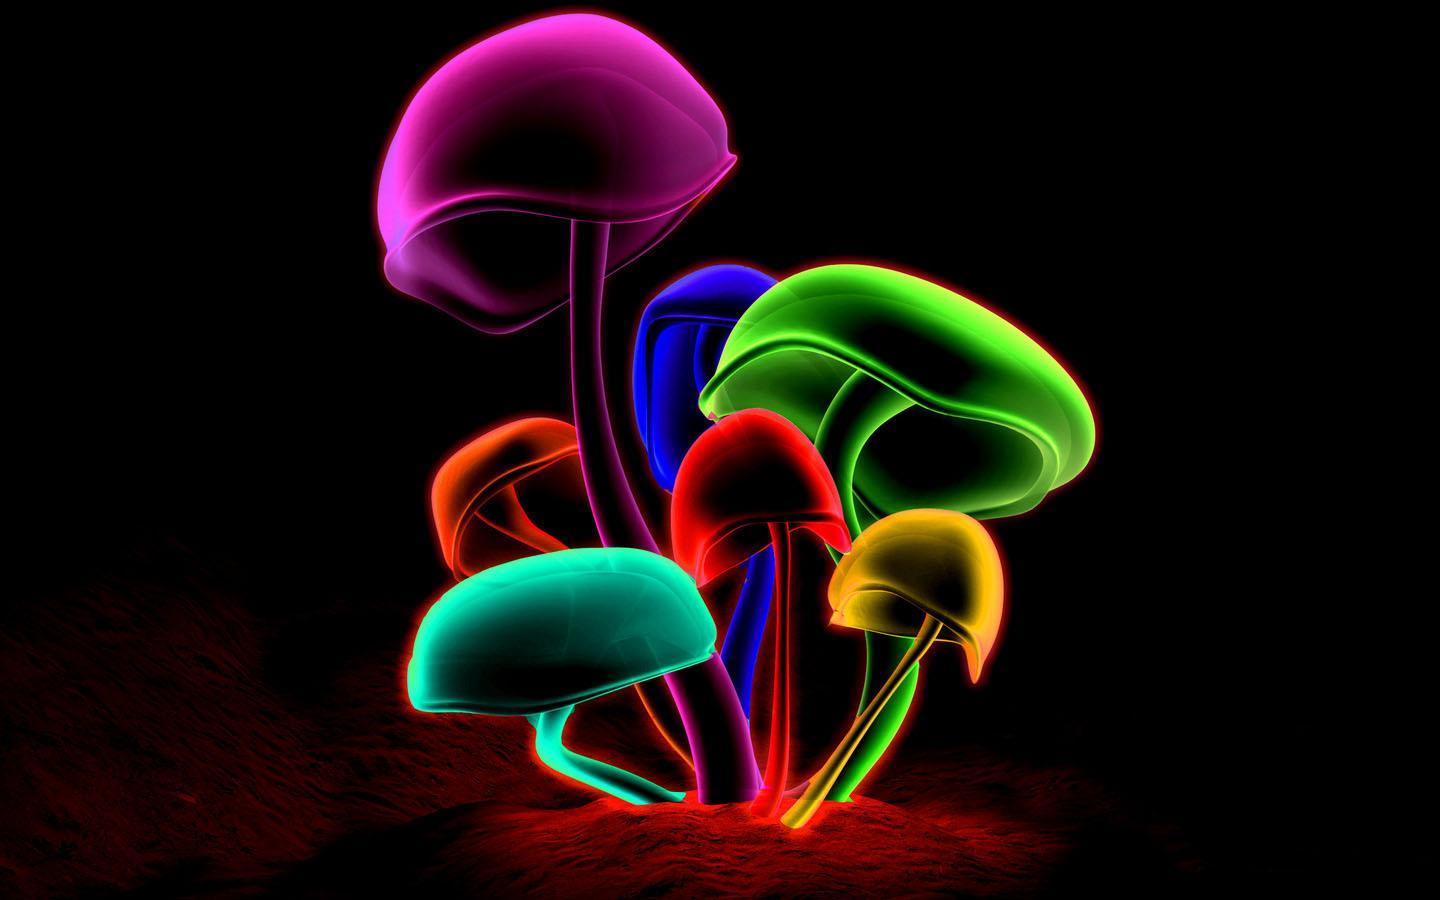  Neon  Wallpaper  for Android  APK Download